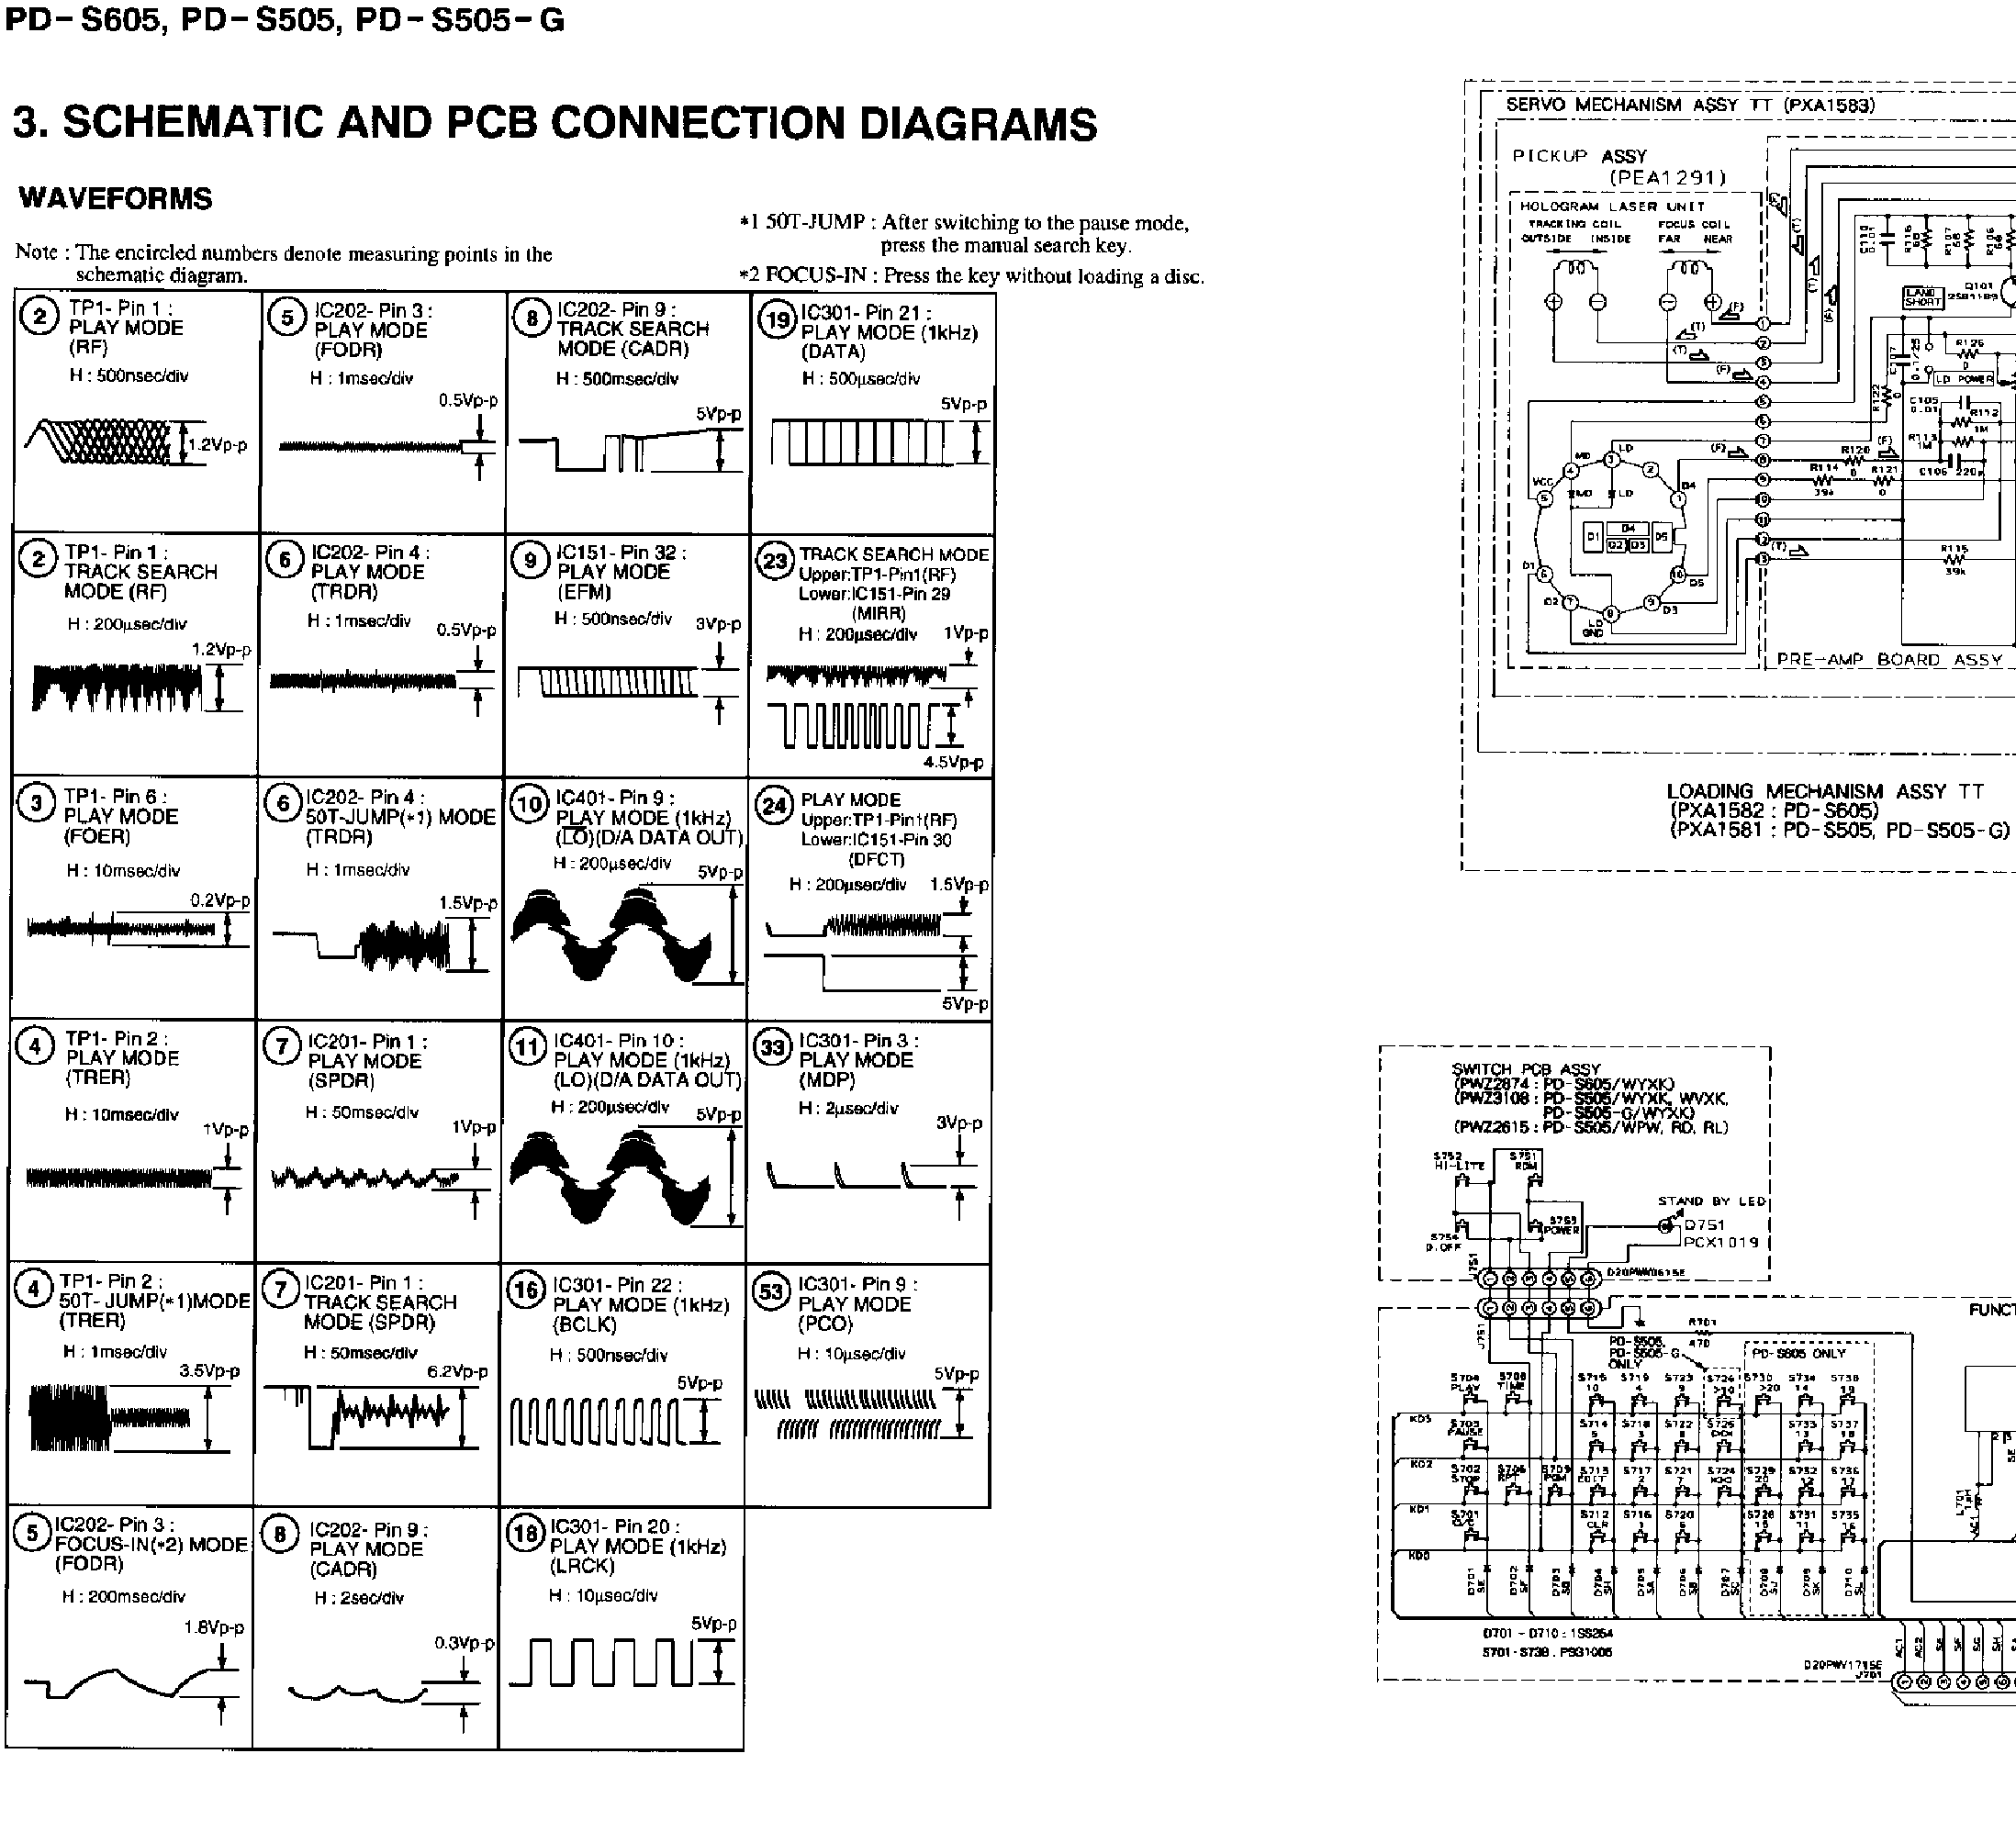 PIONEER PD-S505 605 service manual (1st page)